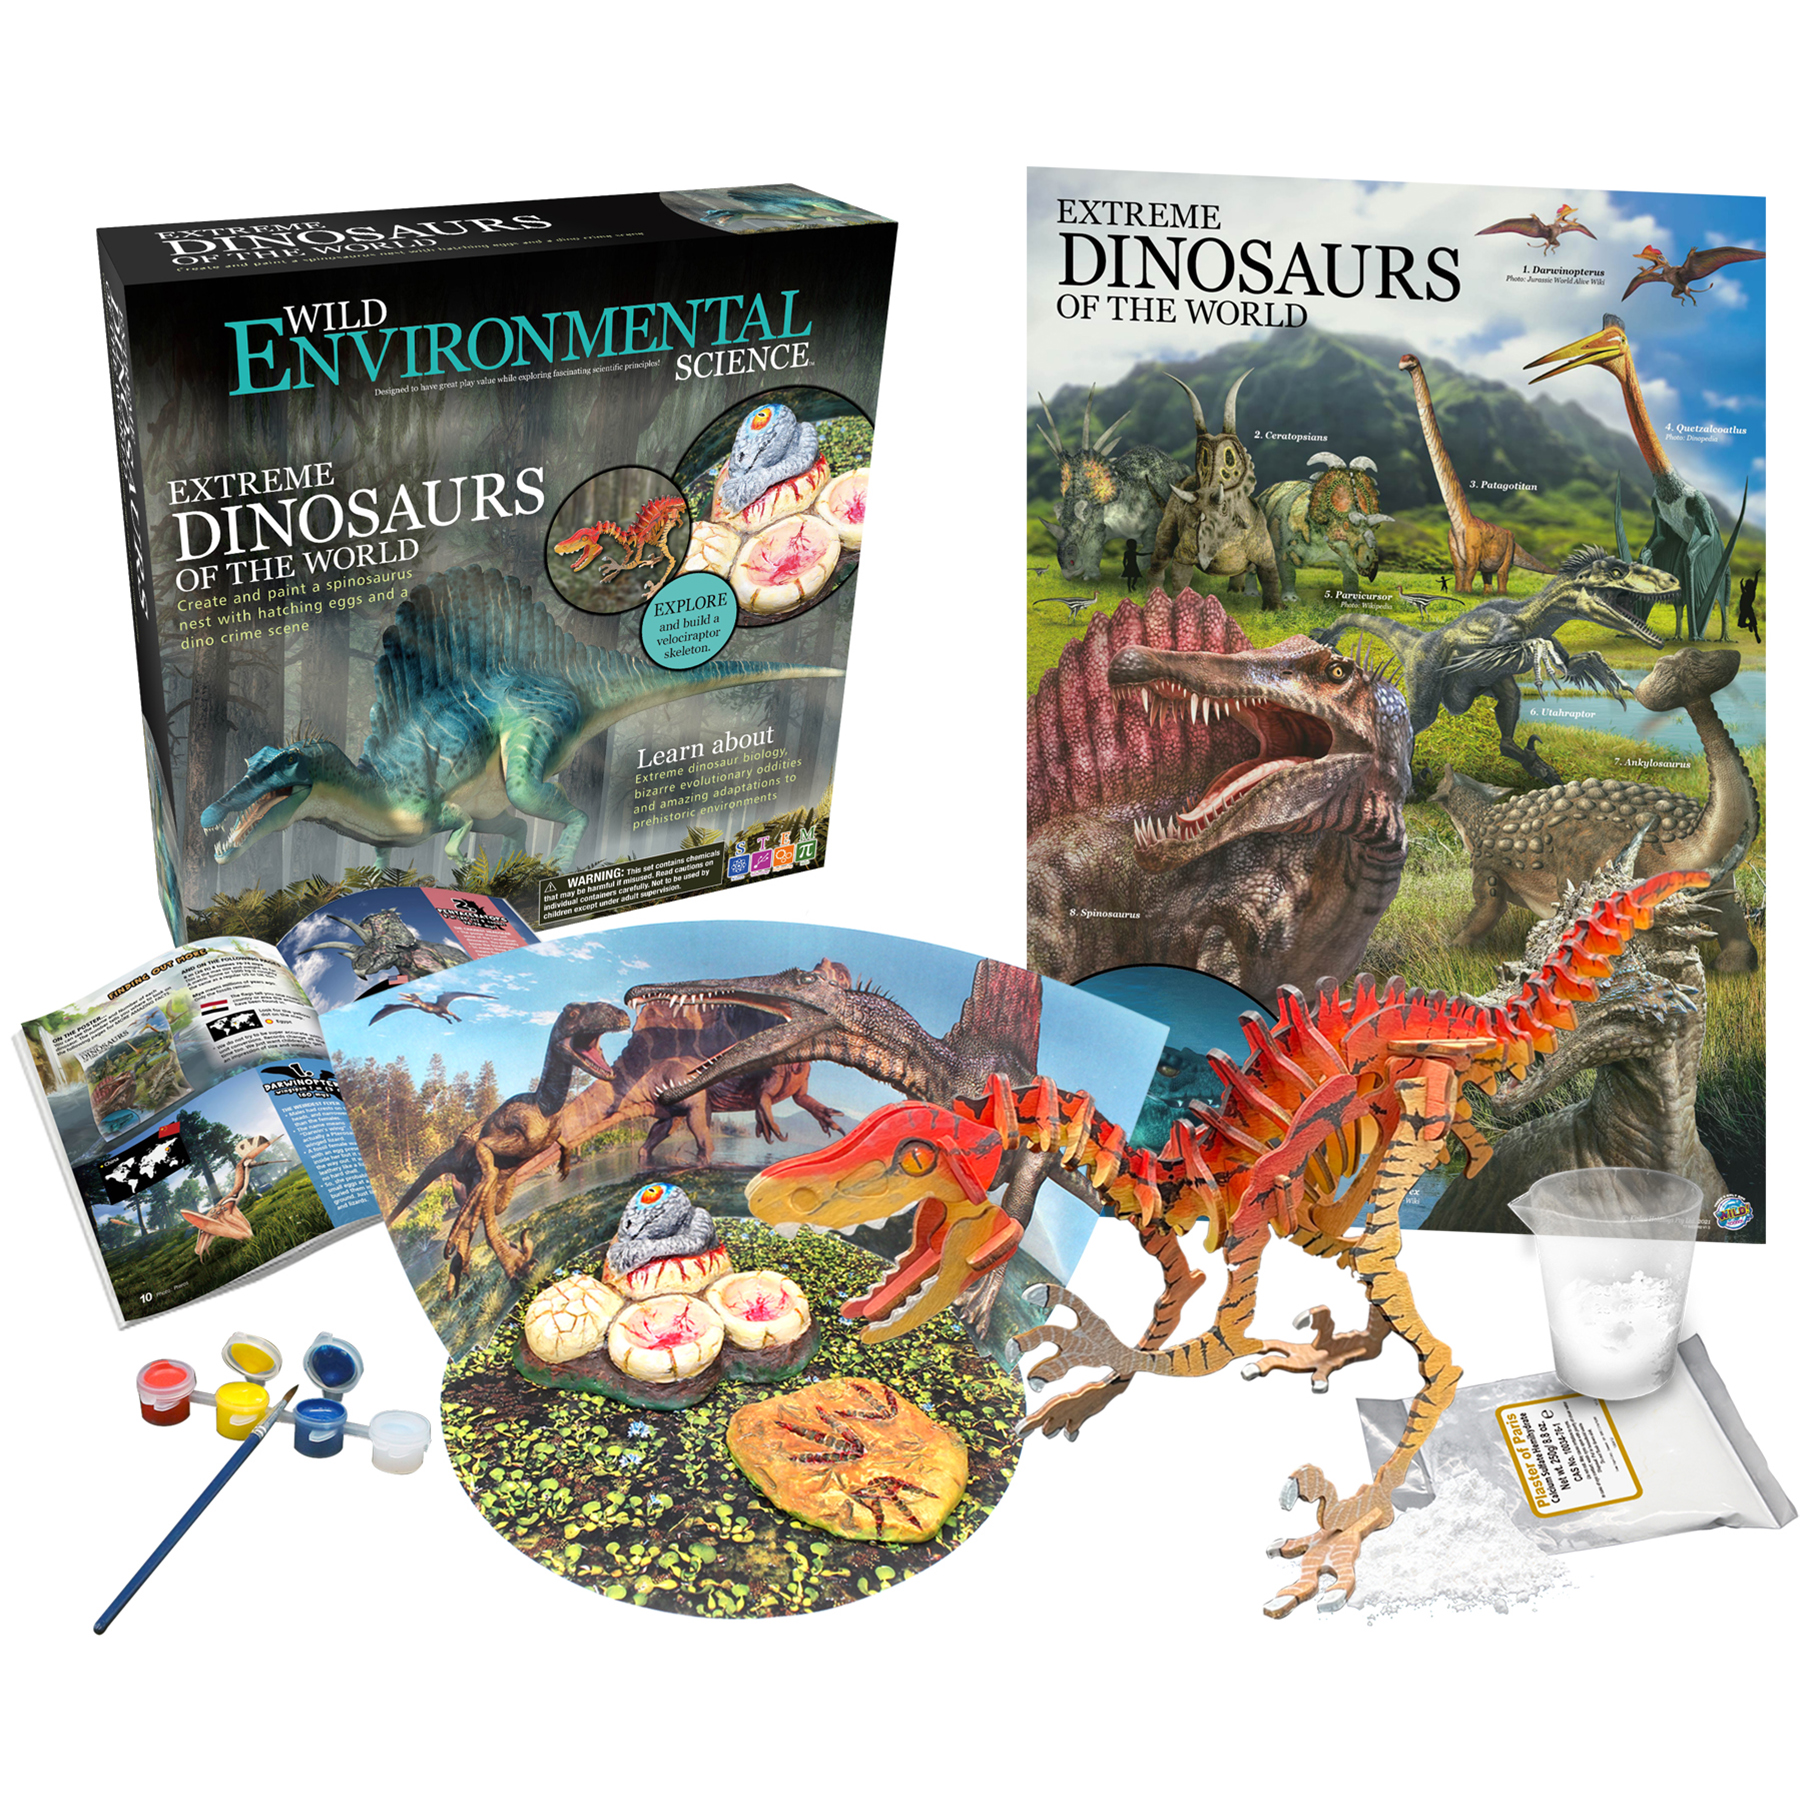 WILD ENVIRONMENTAL SCIENCE Extreme Dinosaurs of the World - For Ages 6+ - Create and Customize Models and Dioramas - Study the Most Extreme Dinosaurs